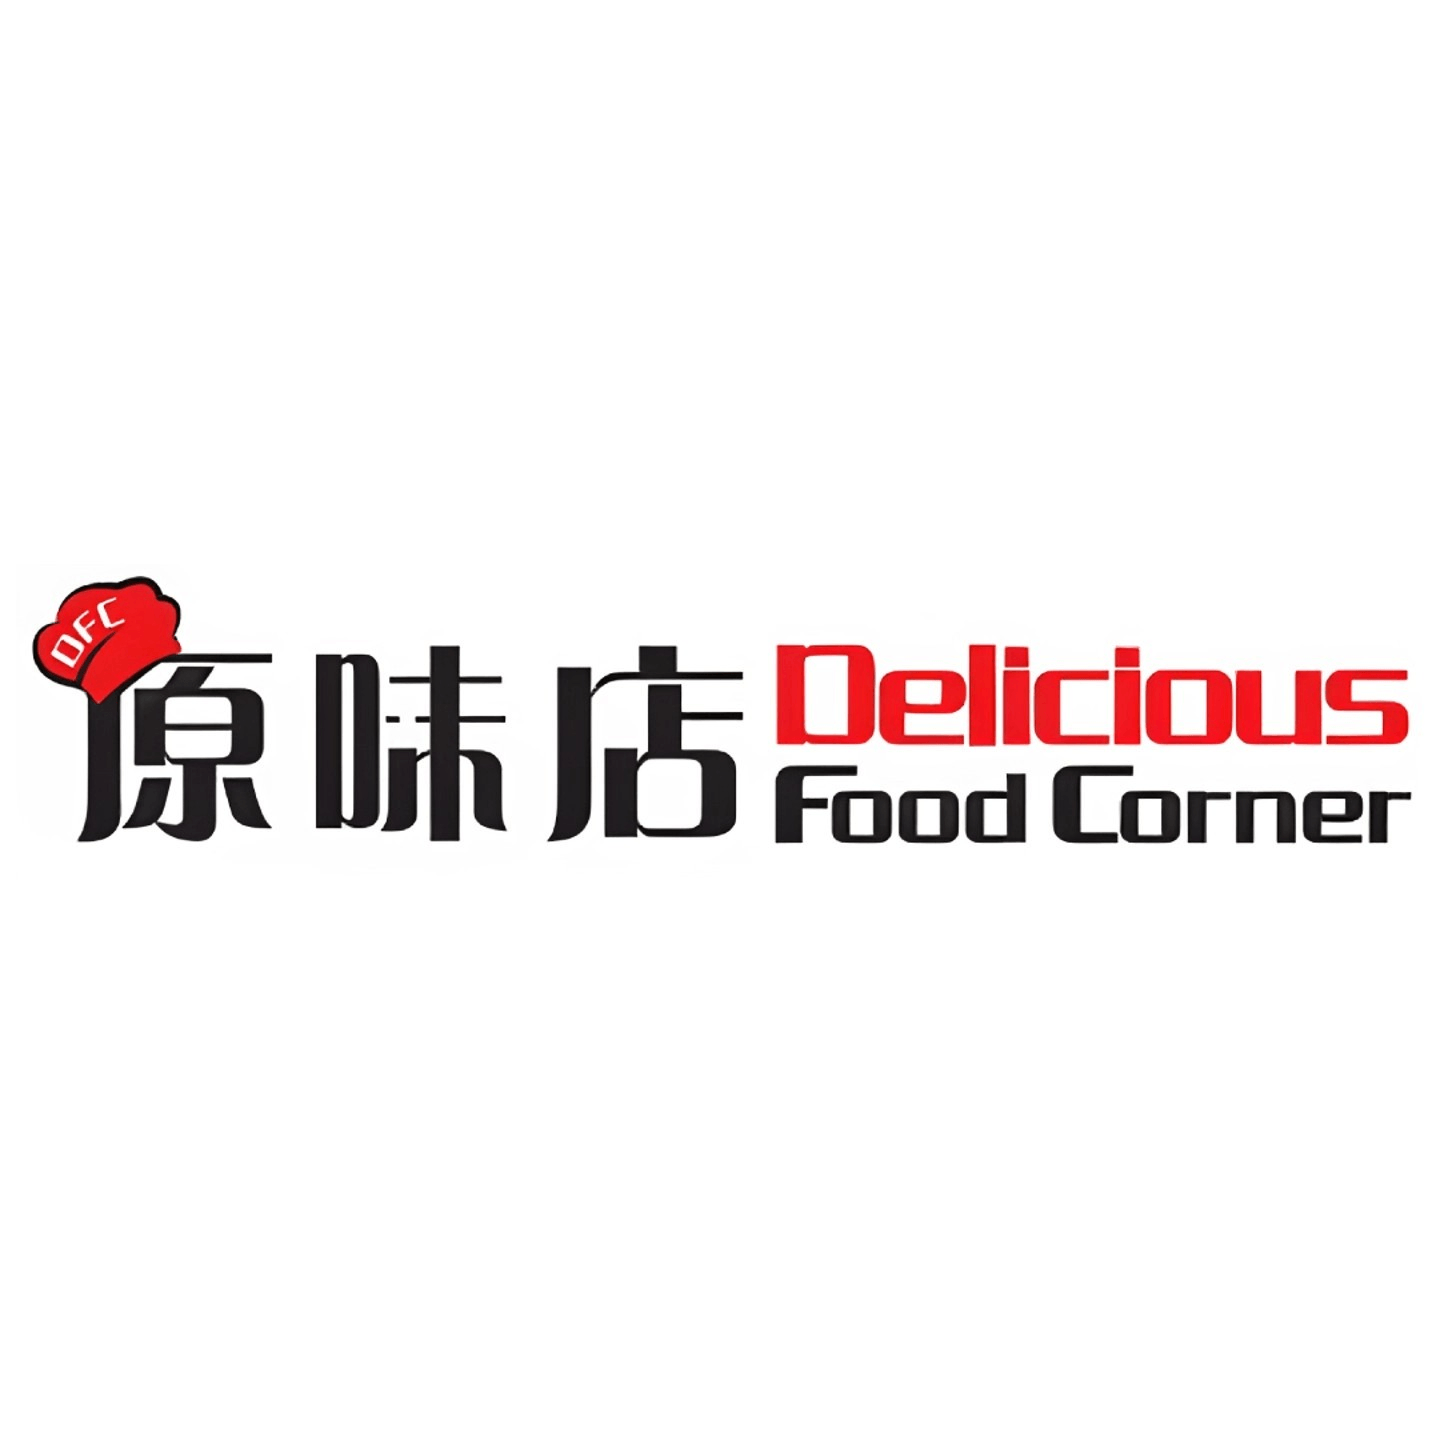 Welcome to Delicious Food Corner!